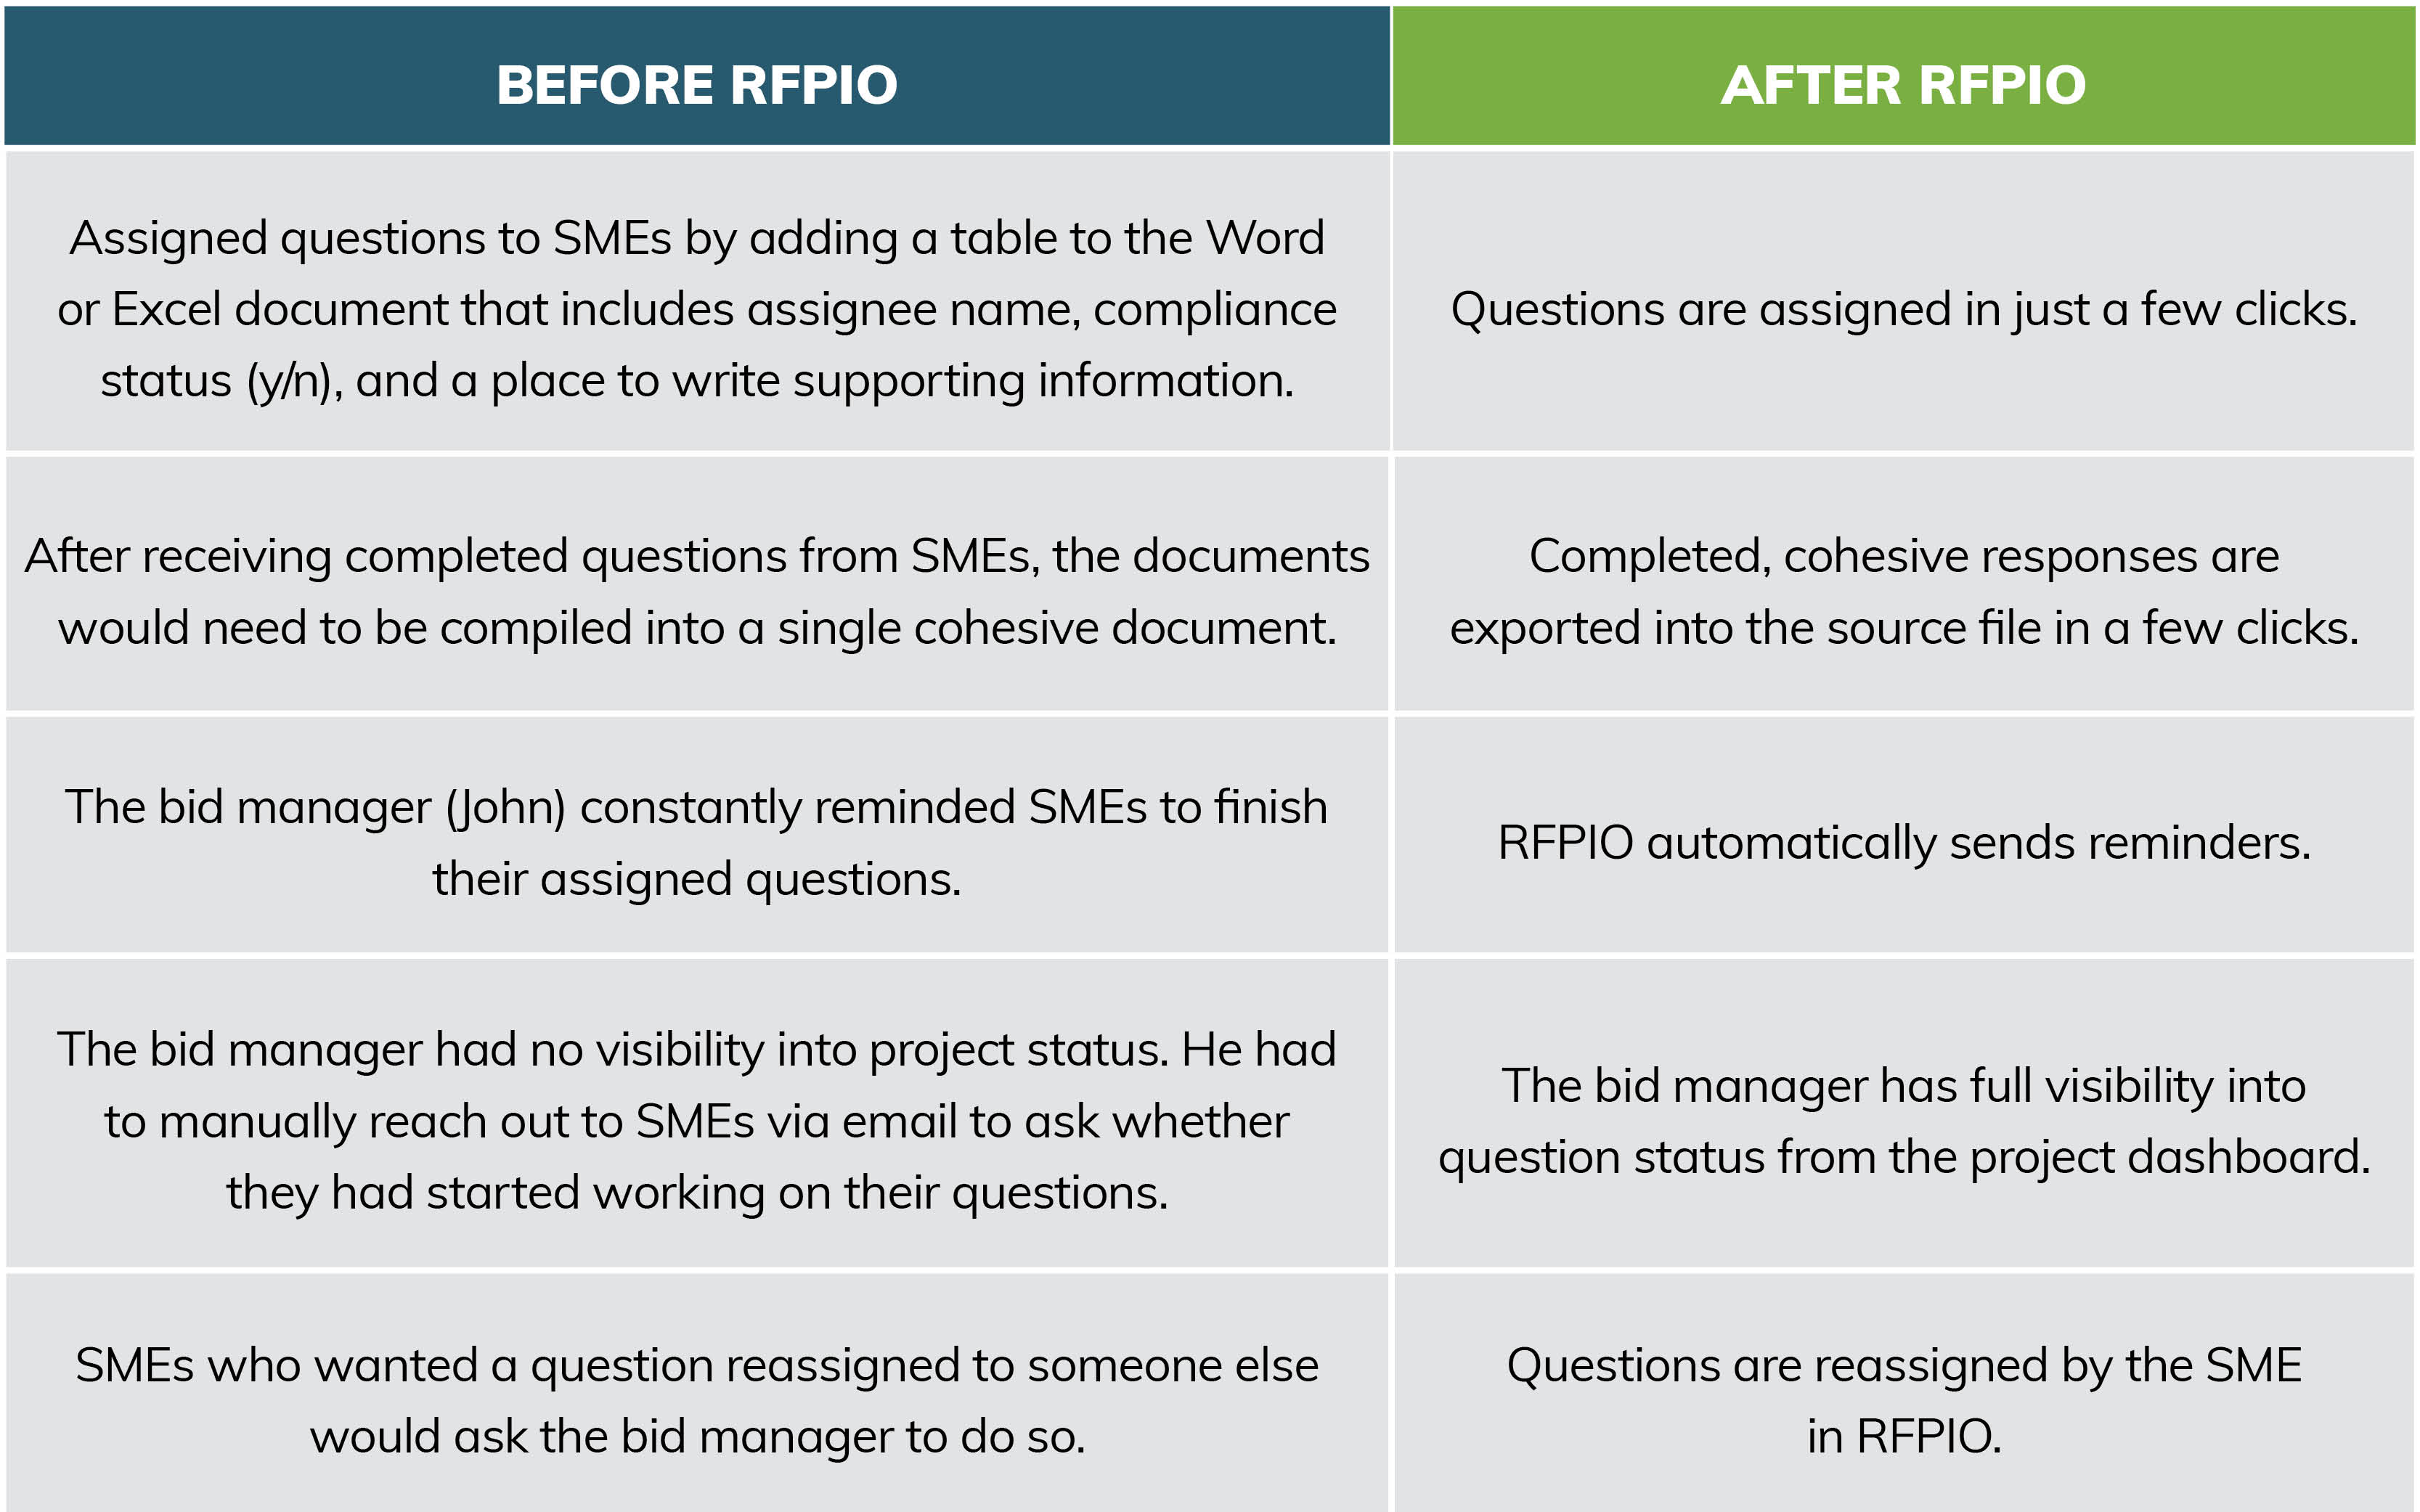 Bid proposal software: Before and after